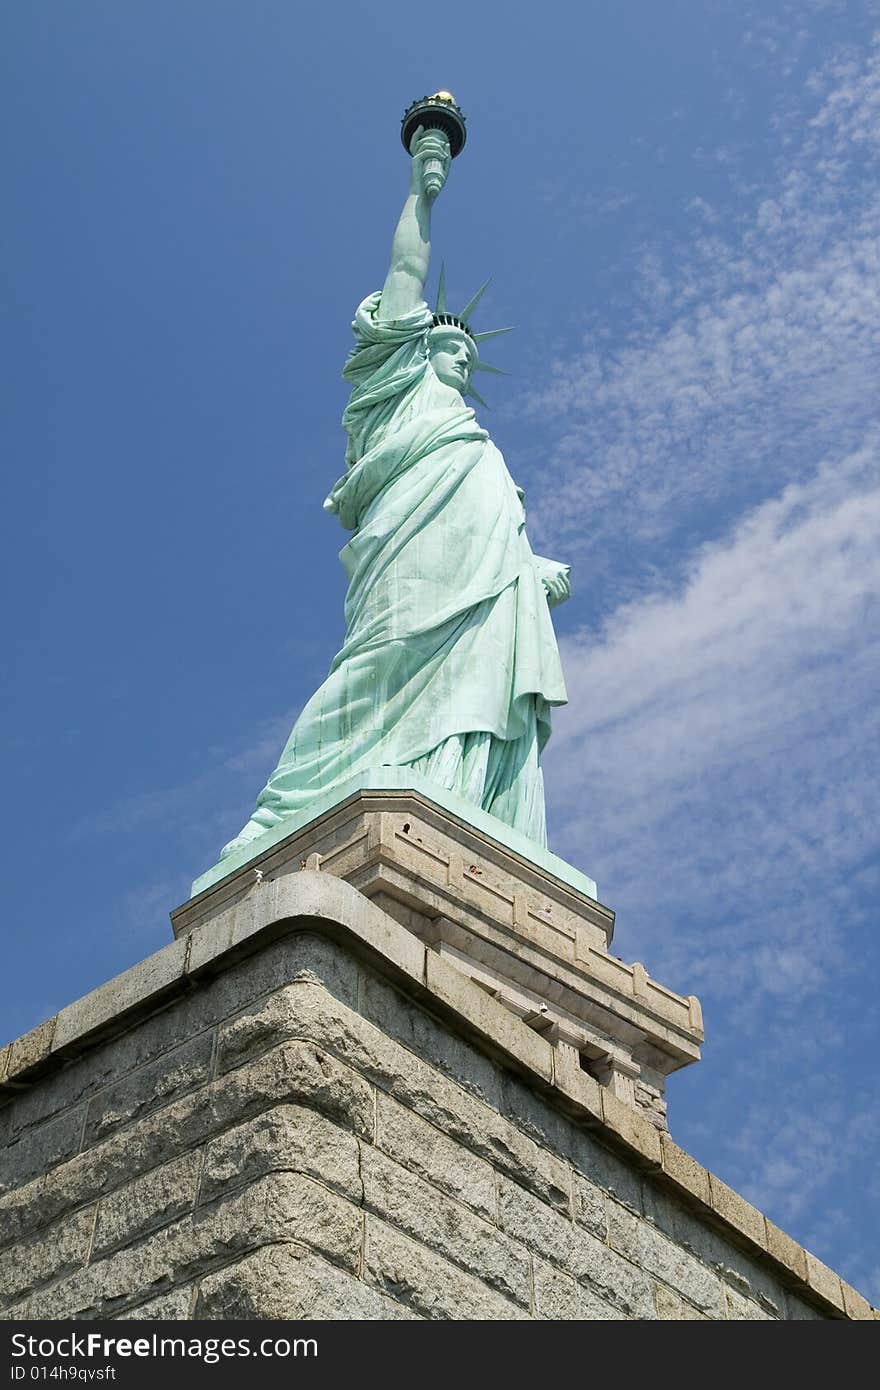 Portrait of the Statue of Liberty on its Pedestal